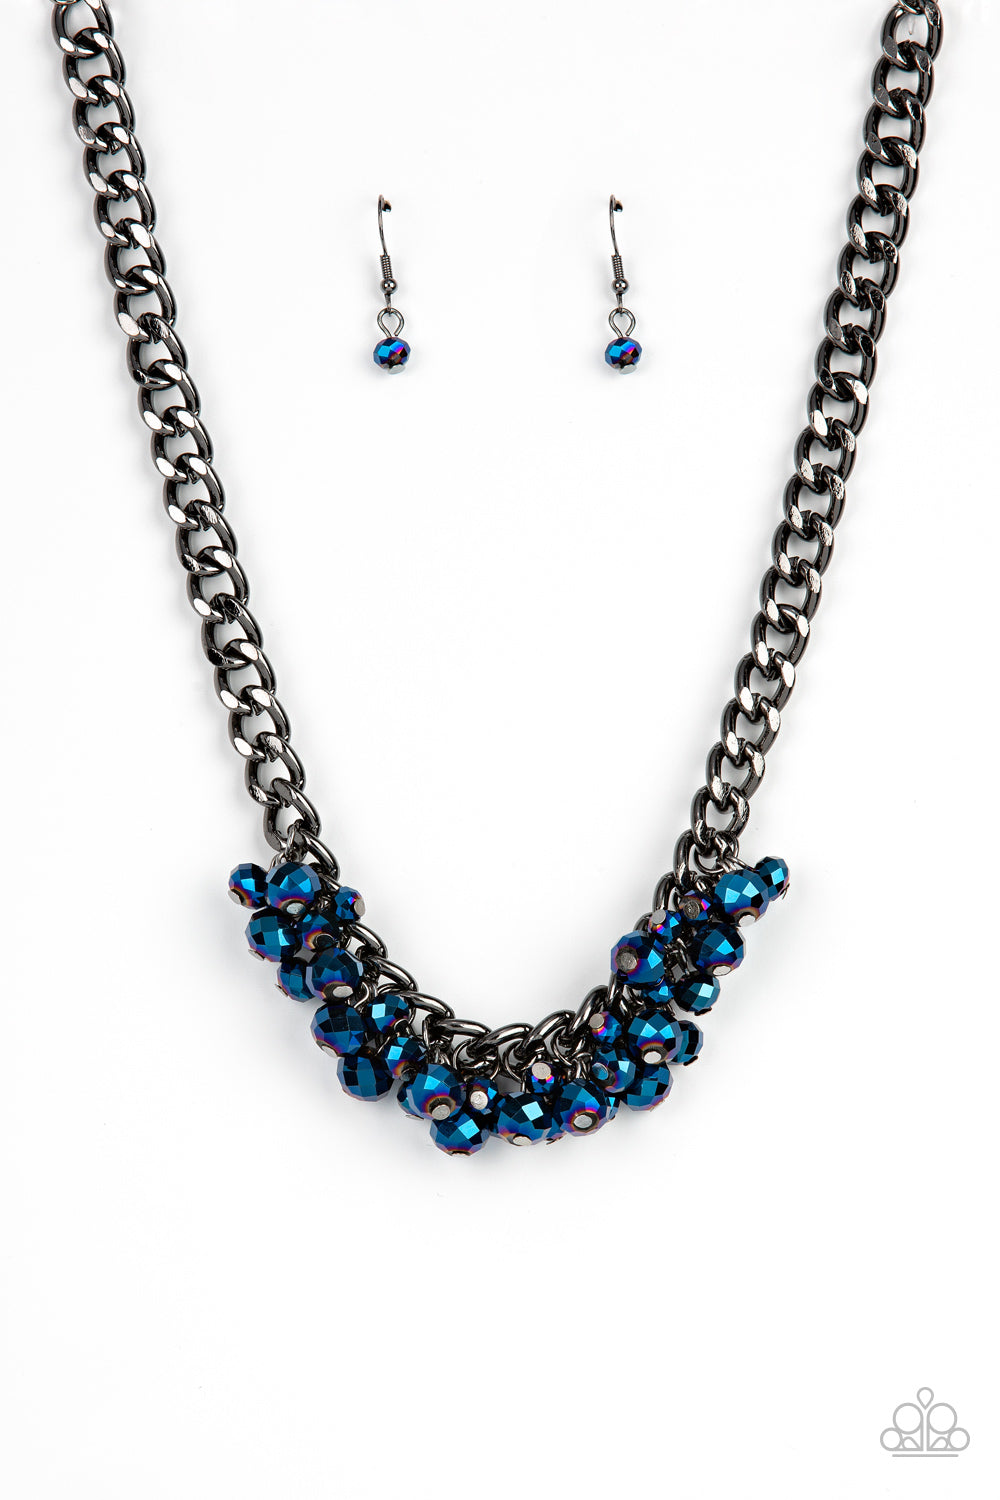 Galactic Knockout - Paparazzi - A faceted collection of metallic flecked blue beads cluster along the center of a chunky gunmetal curb chain, creating a stellar fringe below the collar.